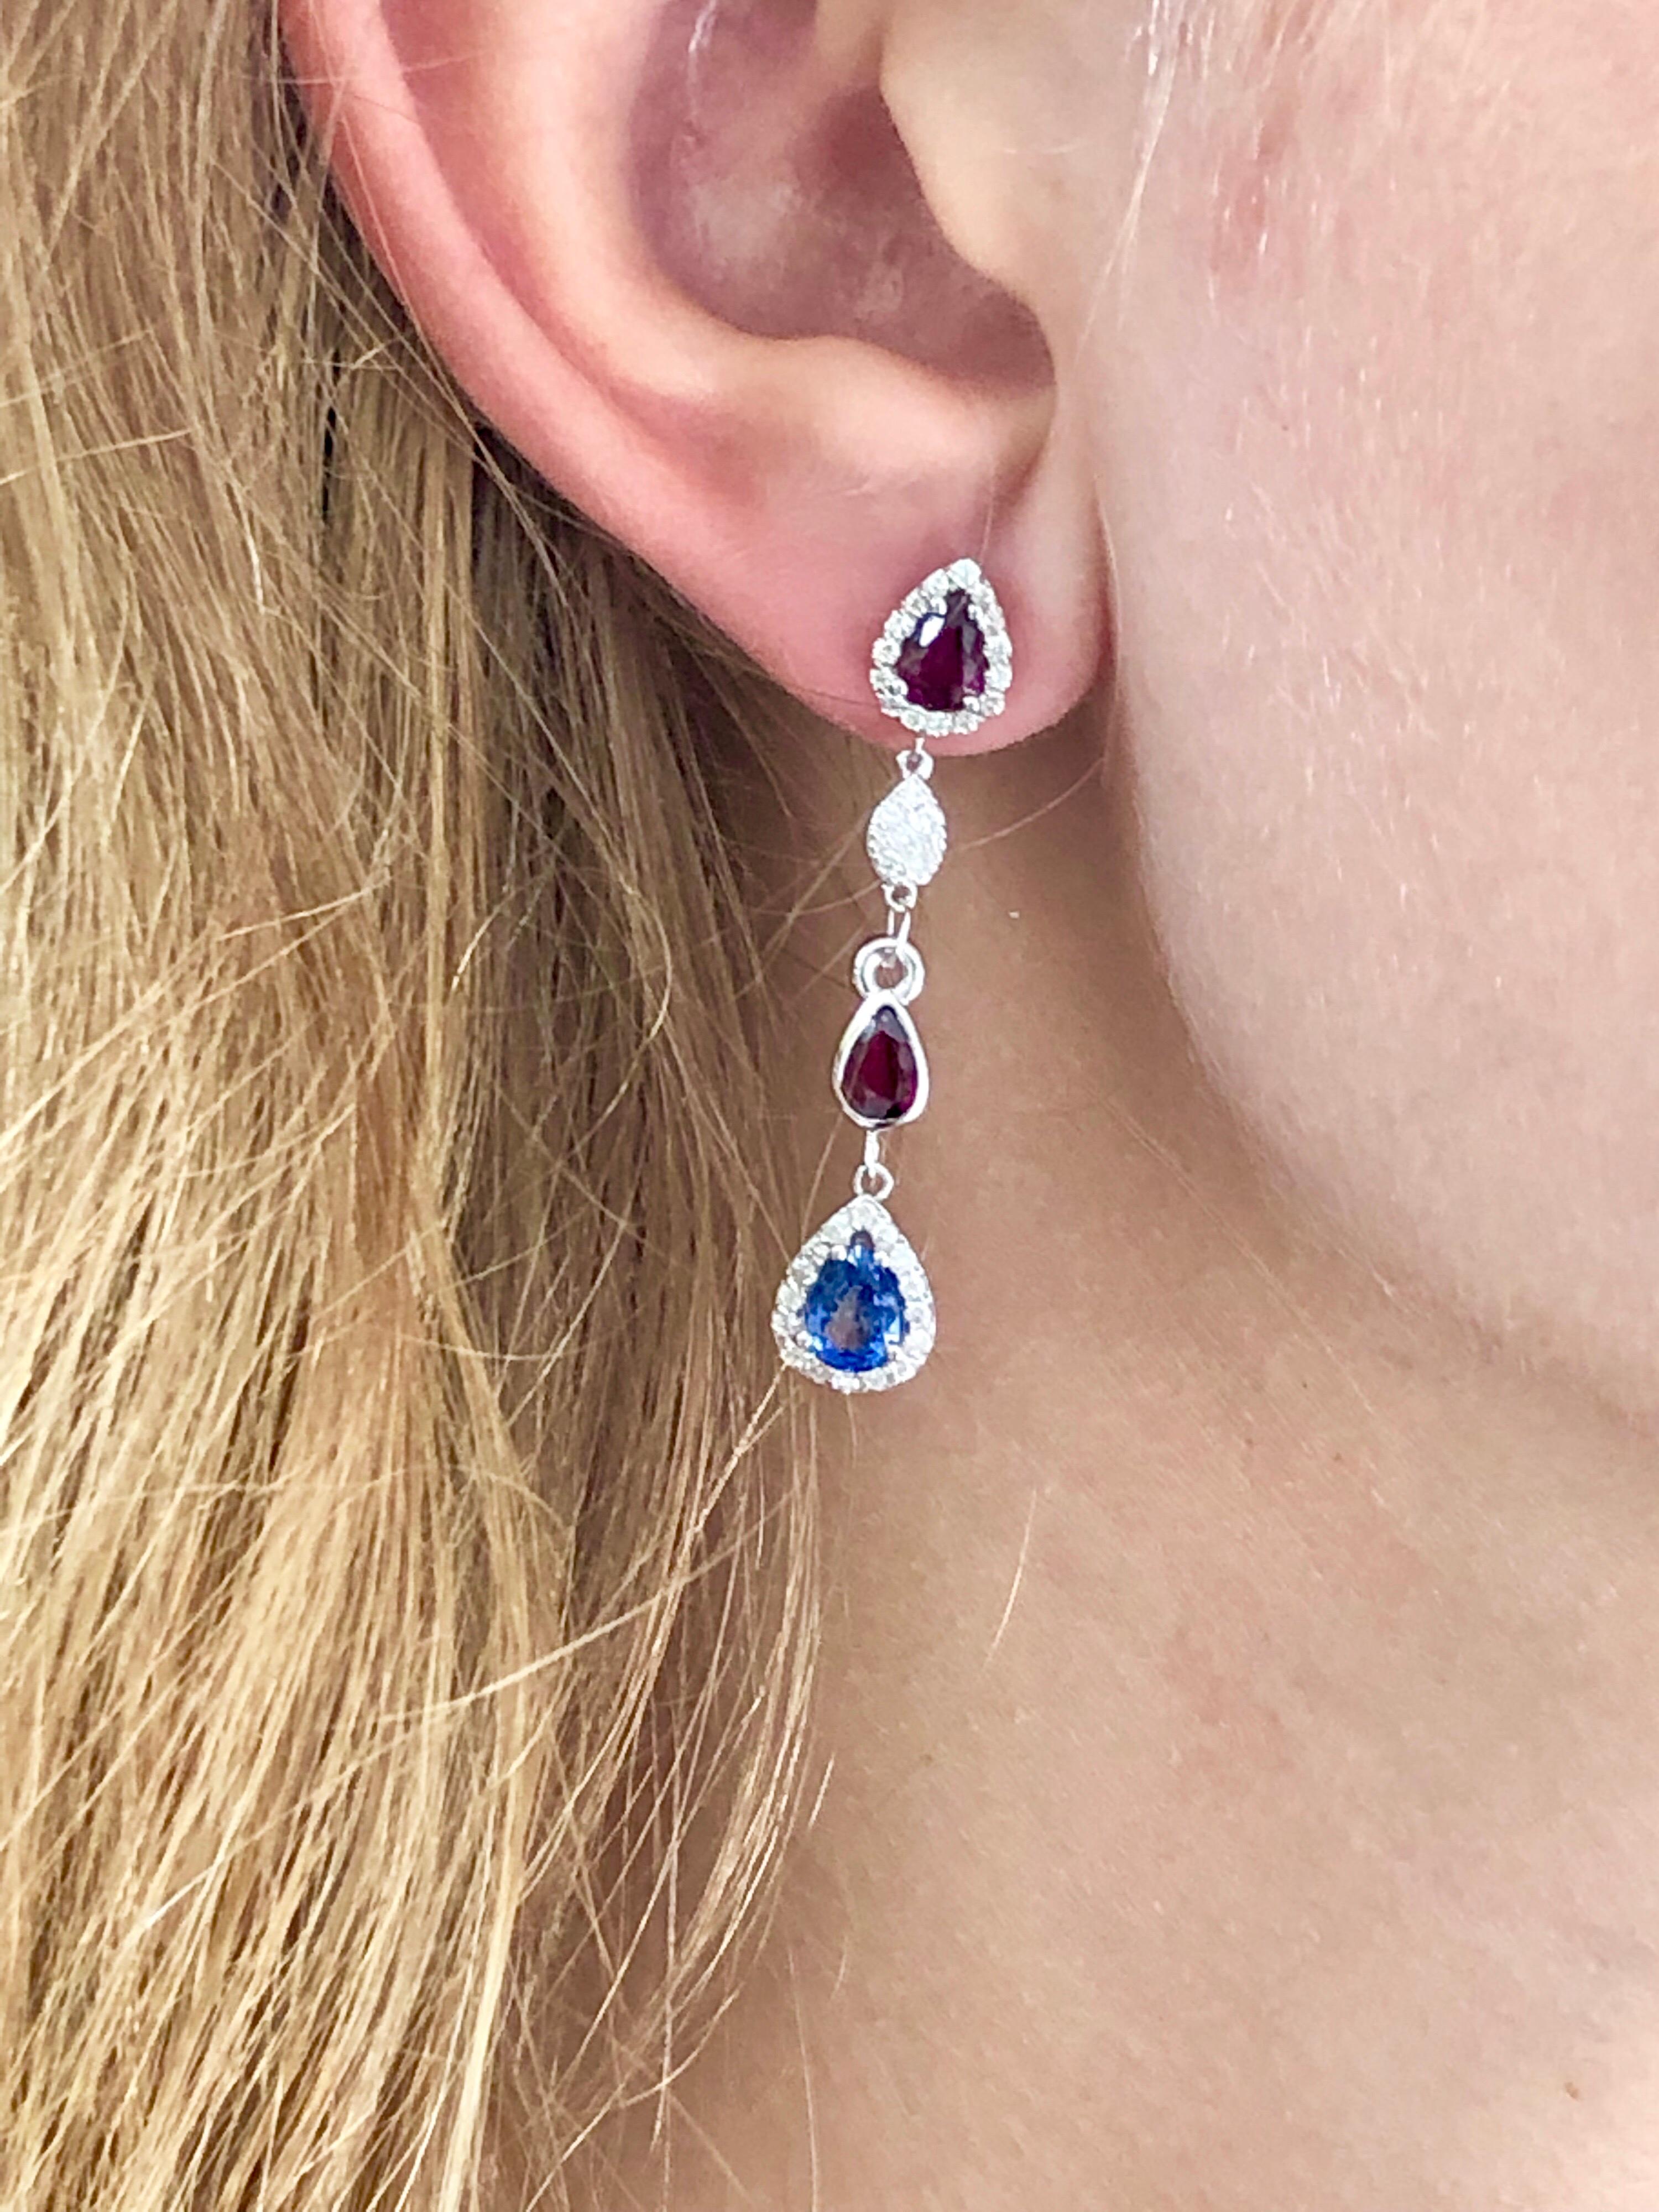 Fourteen karat white gold drop earrings two inch long
Diamonds weighing 1.25 carat 
Pear shape rubies weighing 2.01  carat
Pear shape sapphires weighing 1.70 carat
One of a kind earring
New Earrings
Handmade in the USA
Our team of graduate